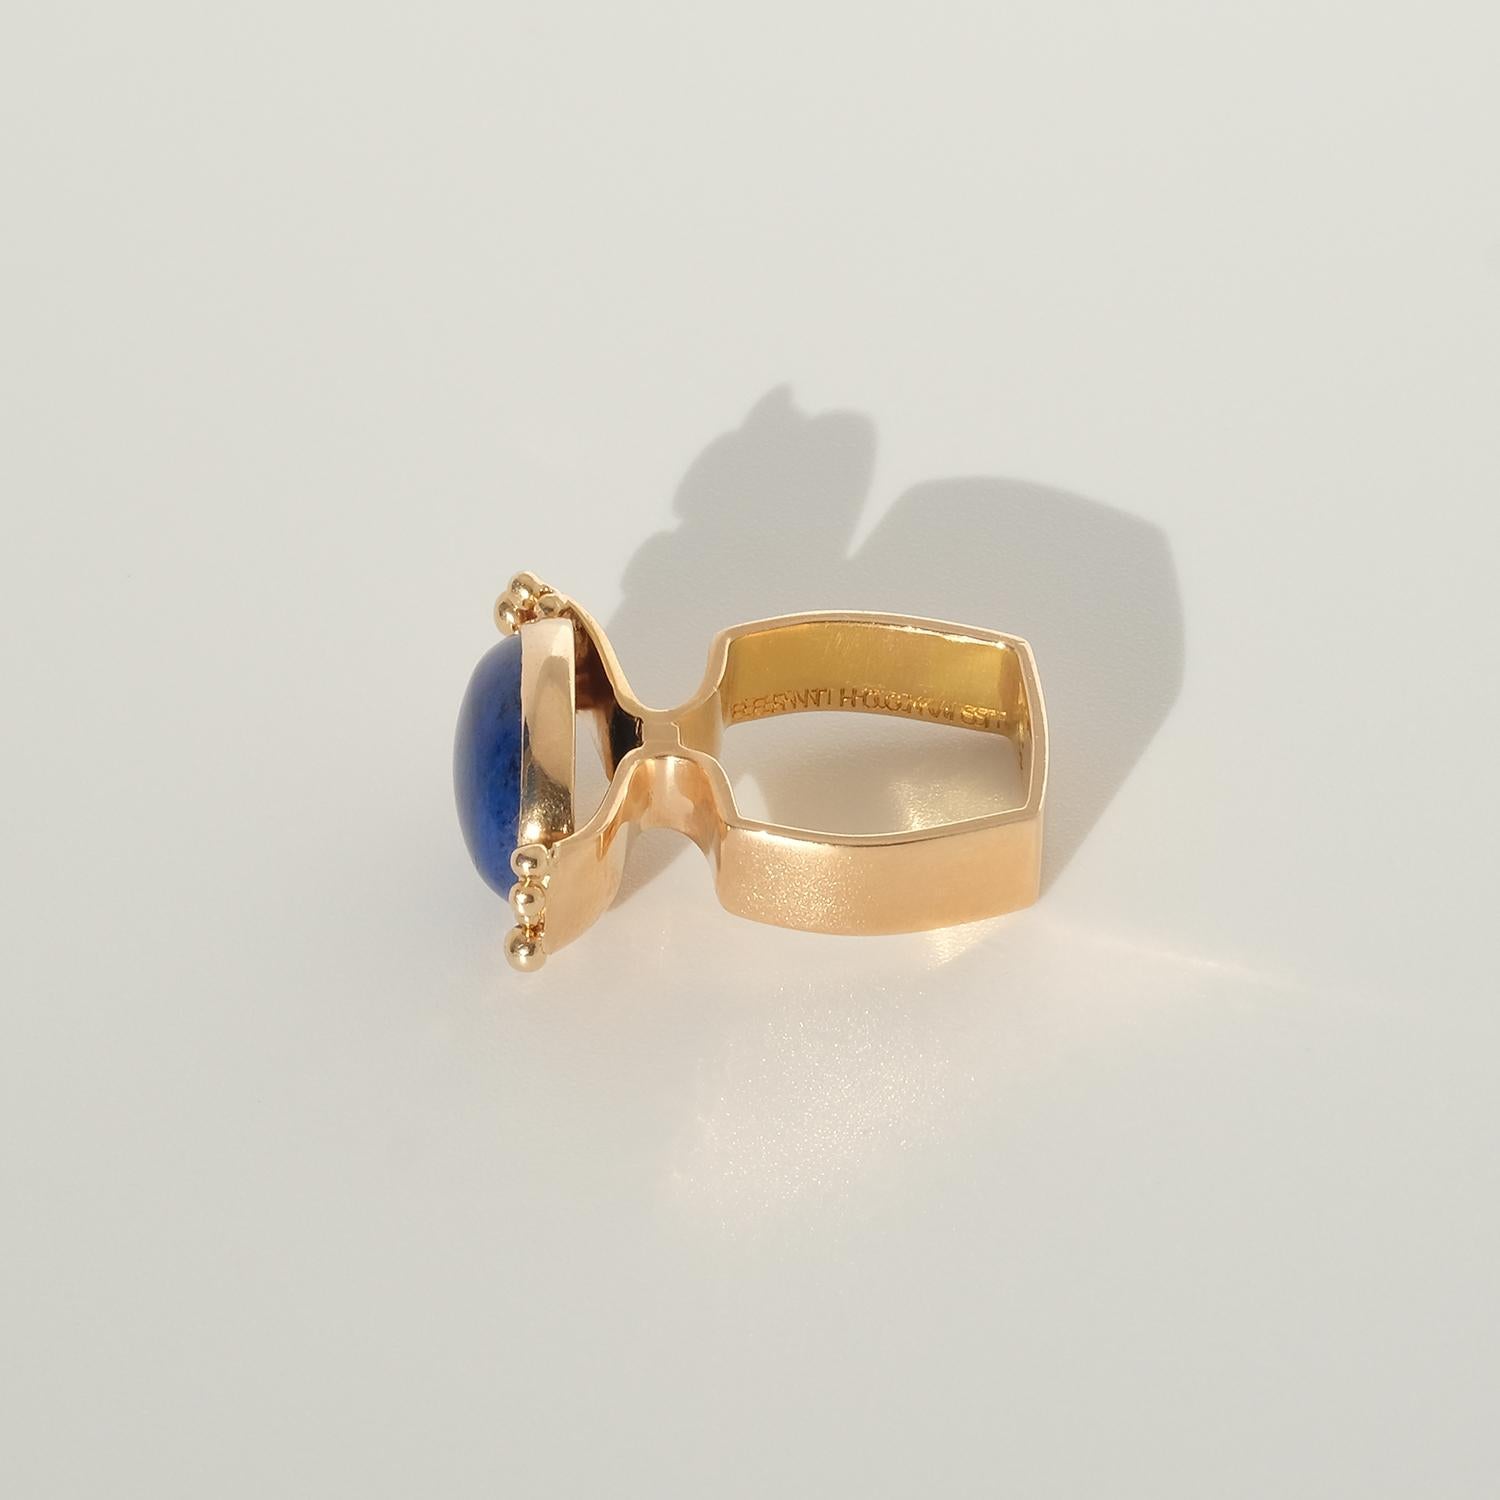 18 K Gold Ring with a Cabochon Cut Lapis Lazuli Stone, Made in 1972 For Sale 5